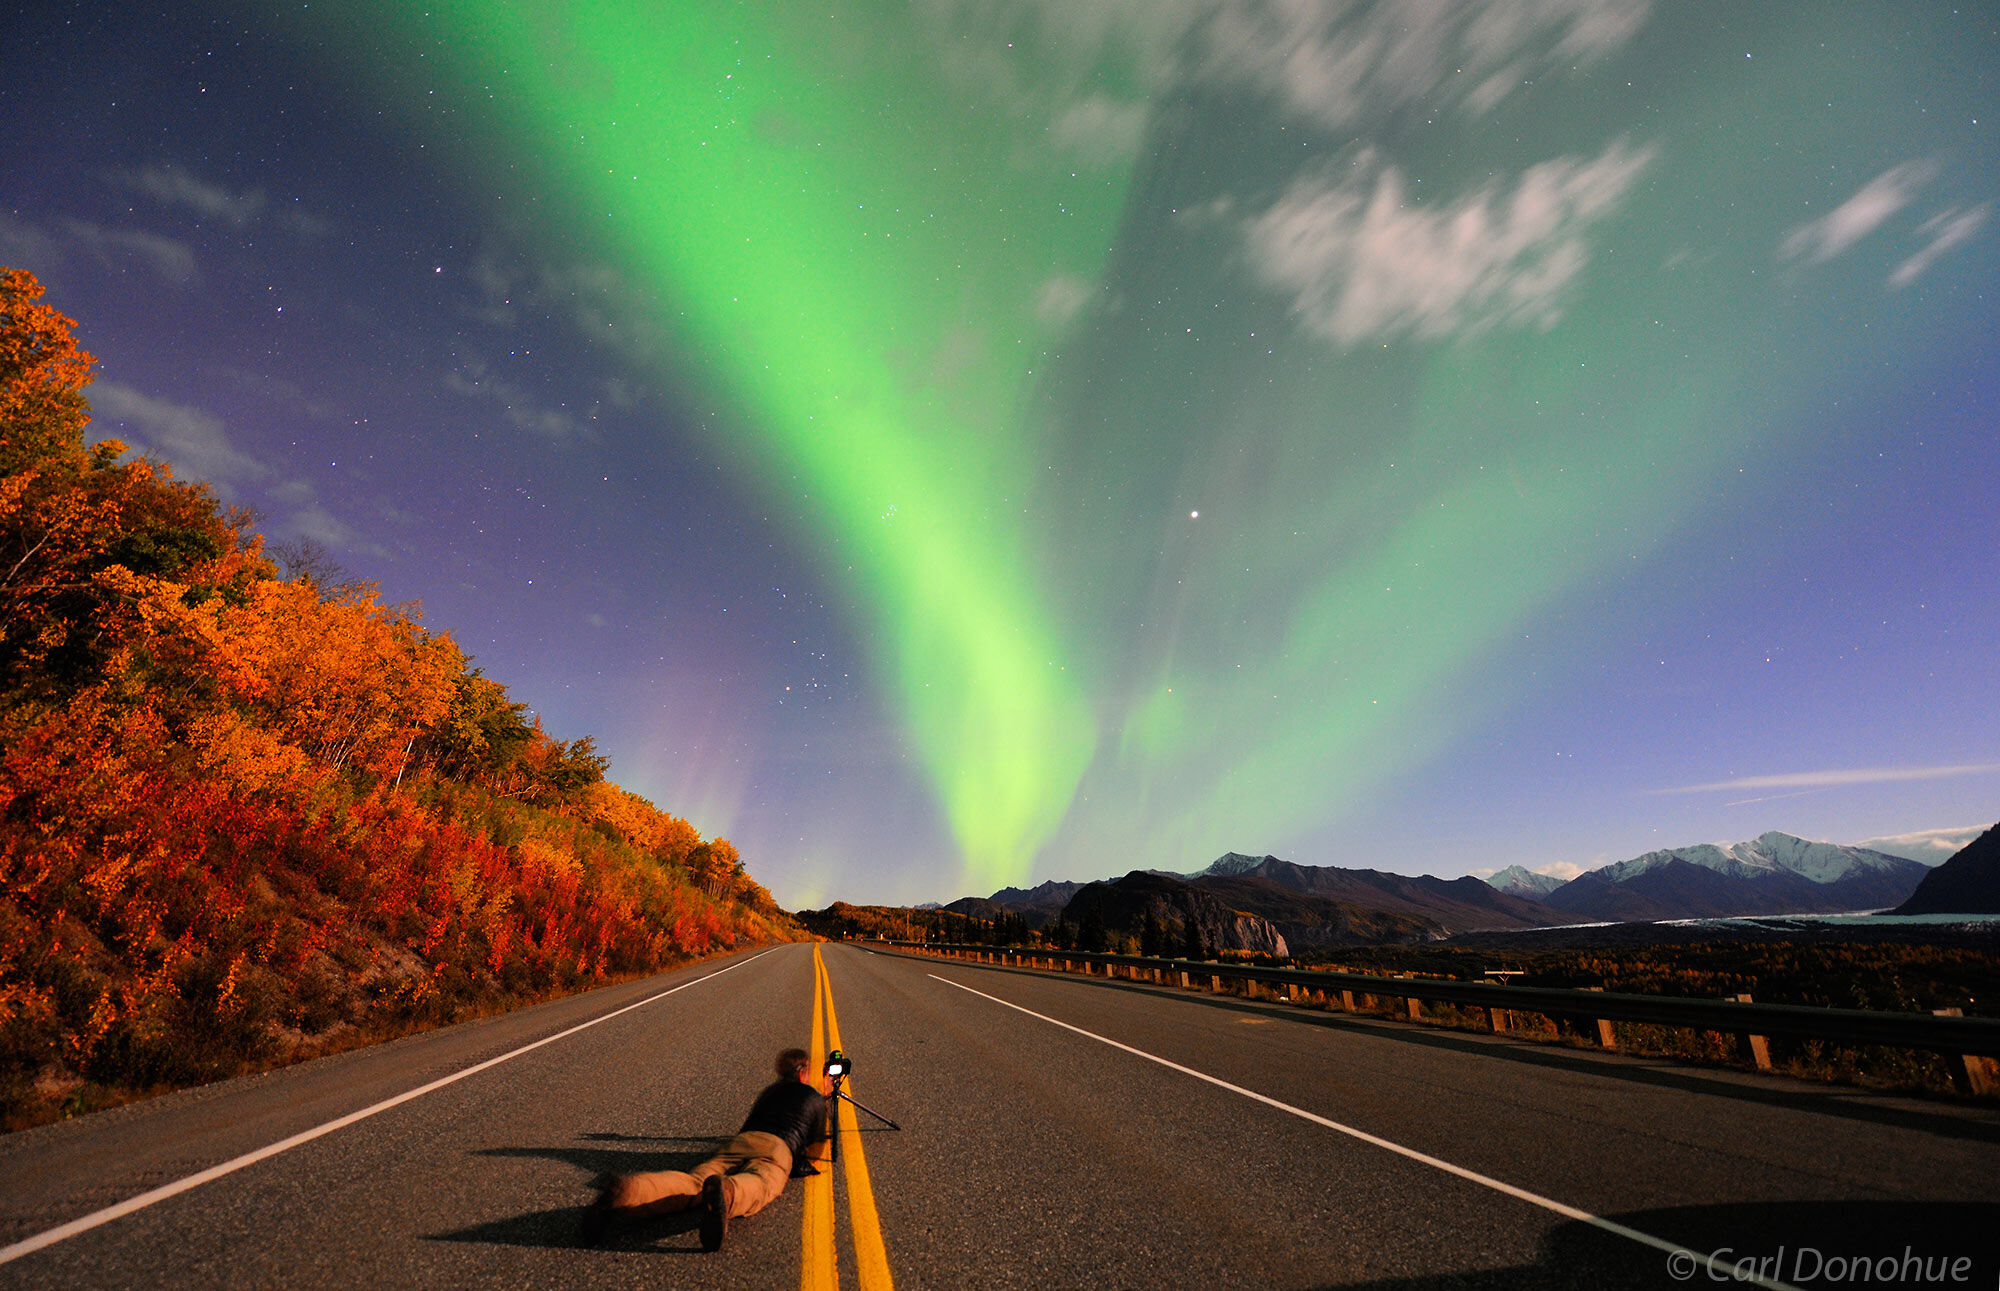 A photographer prone on the ground on the Glenn Highway photographs the Northern lights as they light up the night sky and fall...